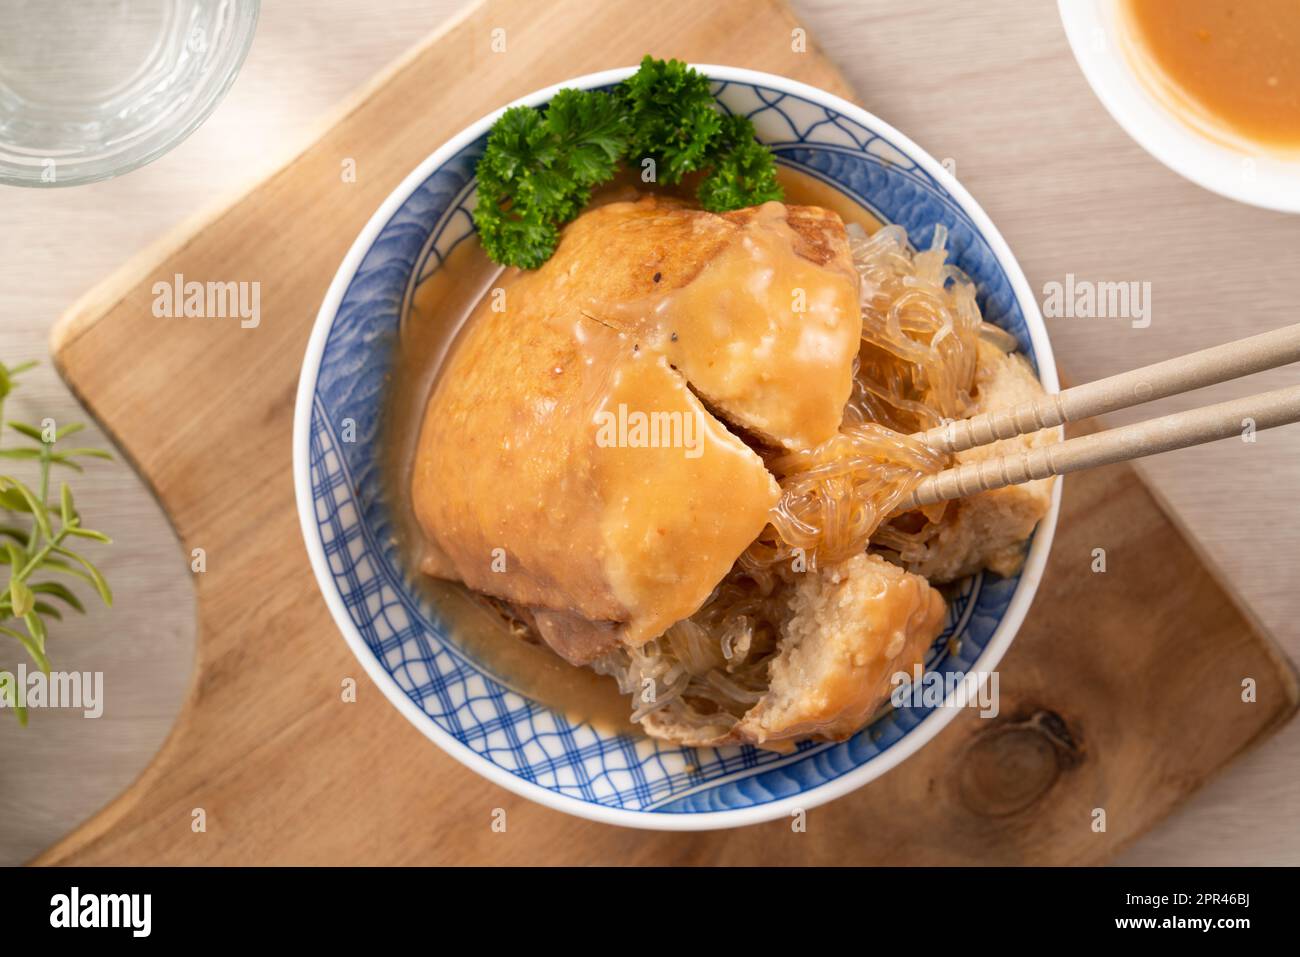 Tamsui agei (age, aburaage, ageh), delicious street food in Taiwan, stuffed with mung bean noodles and sauce topping. Stock Photo